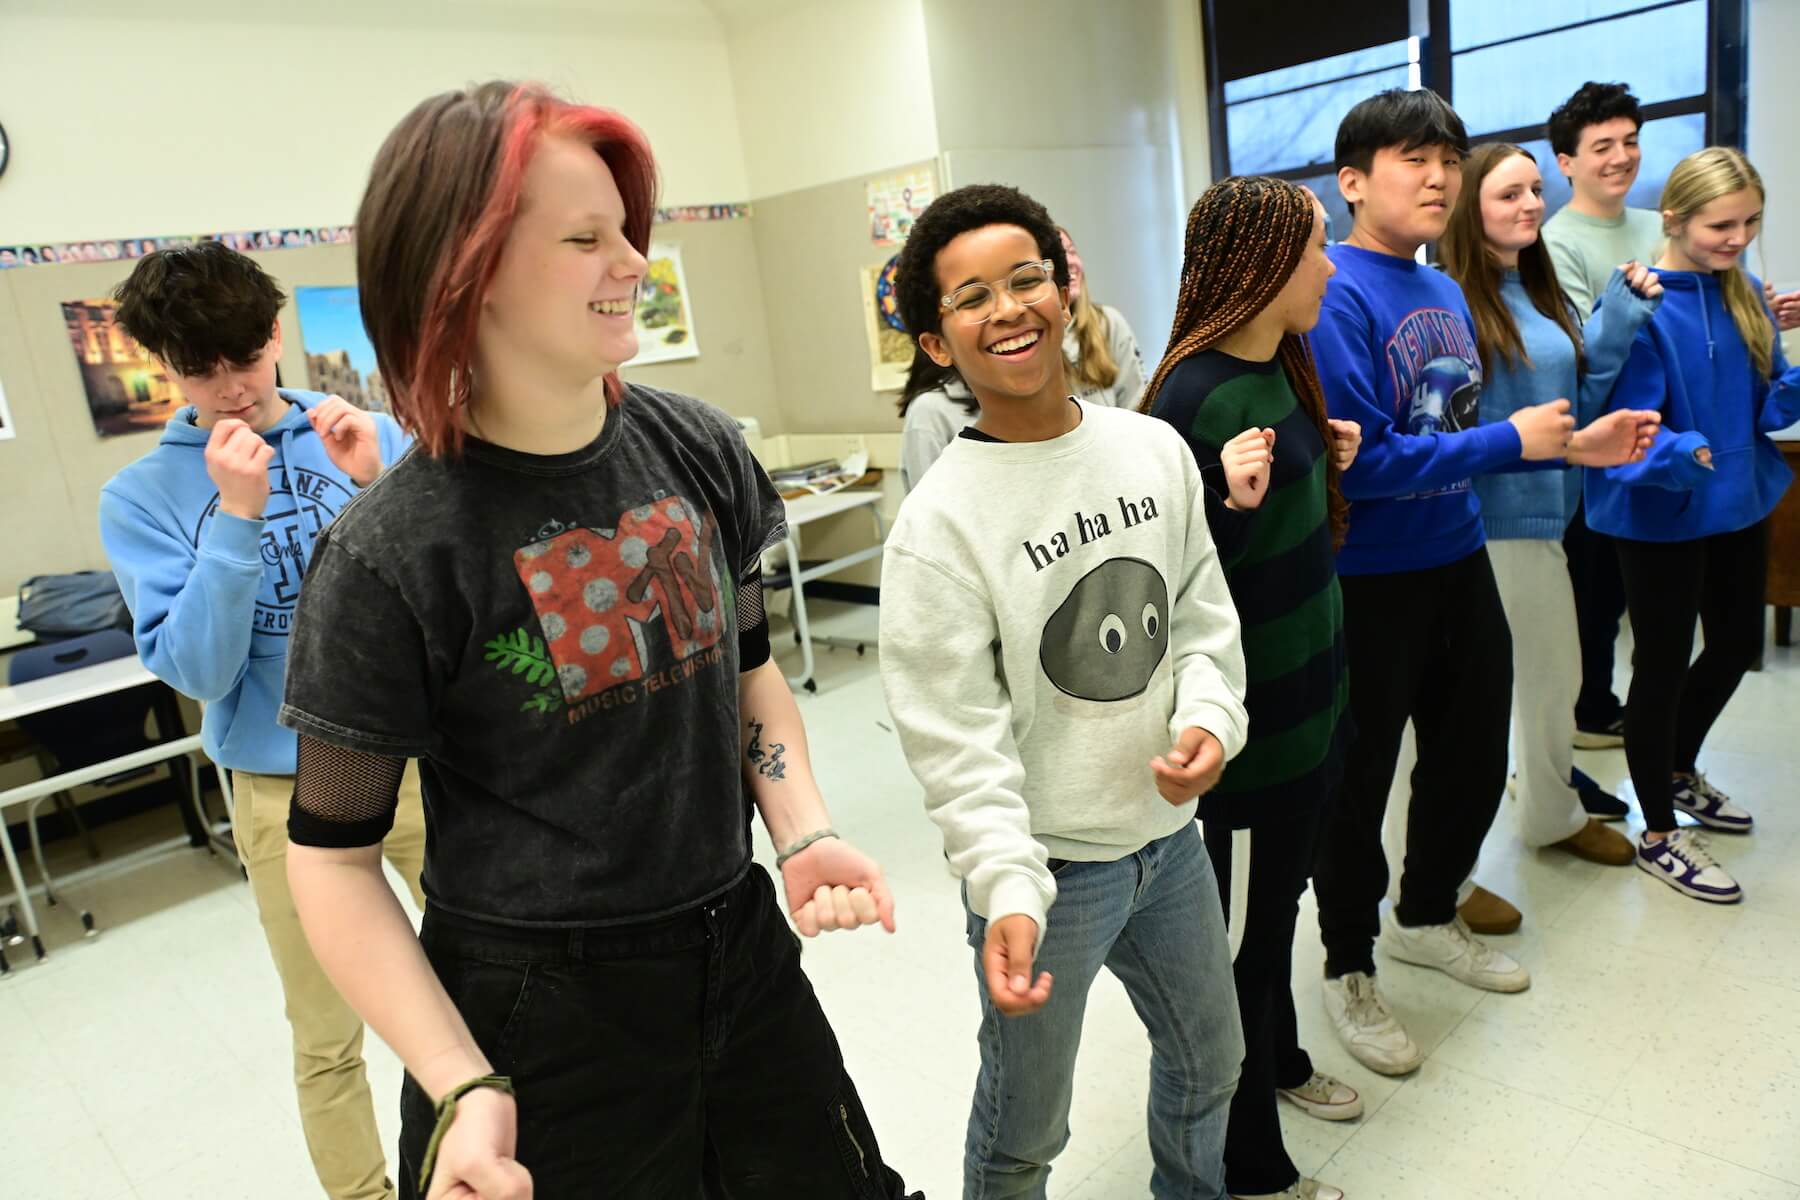 Ethical Culture Fieldston School Middle School students learn a dance together in classroom